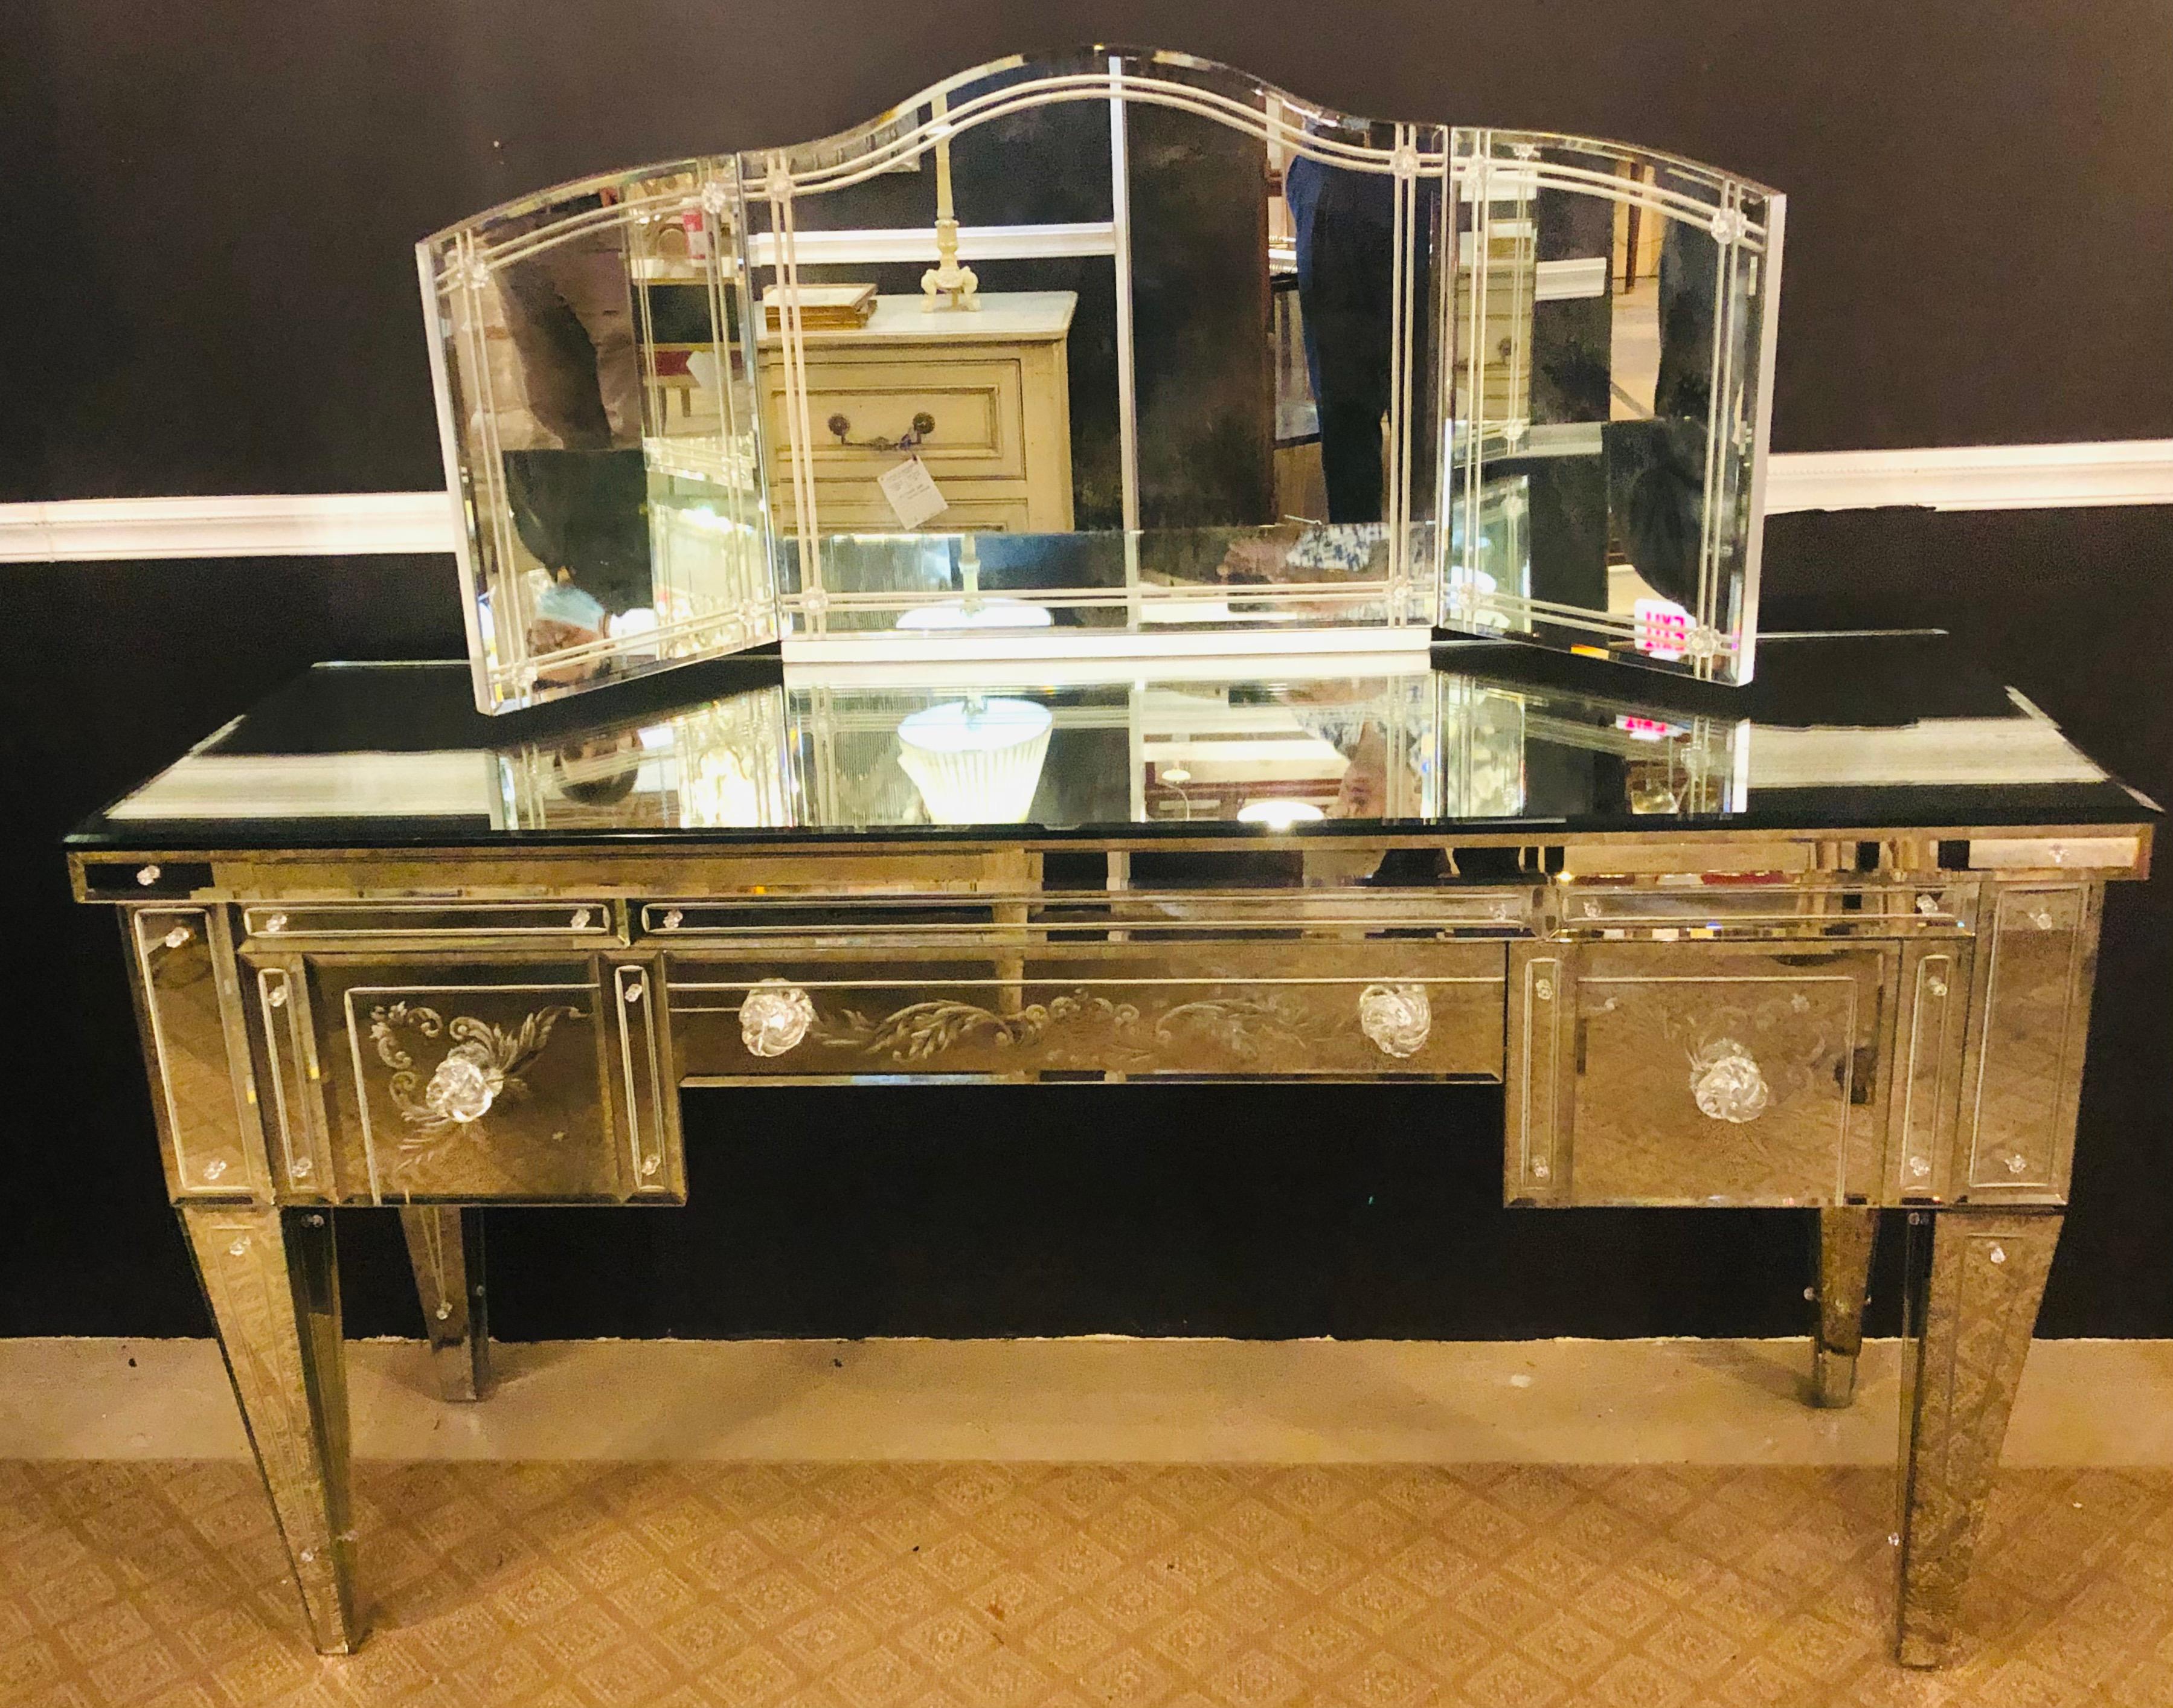 Hollywood Regency beveled and etched glass mirrored vanity desk. Finished on all sides, lined interior having a tri-fold desk top etched mirror measuring: 48 inches wide by 21 inches high. This simply stunning custom made beveled mirror etched glass